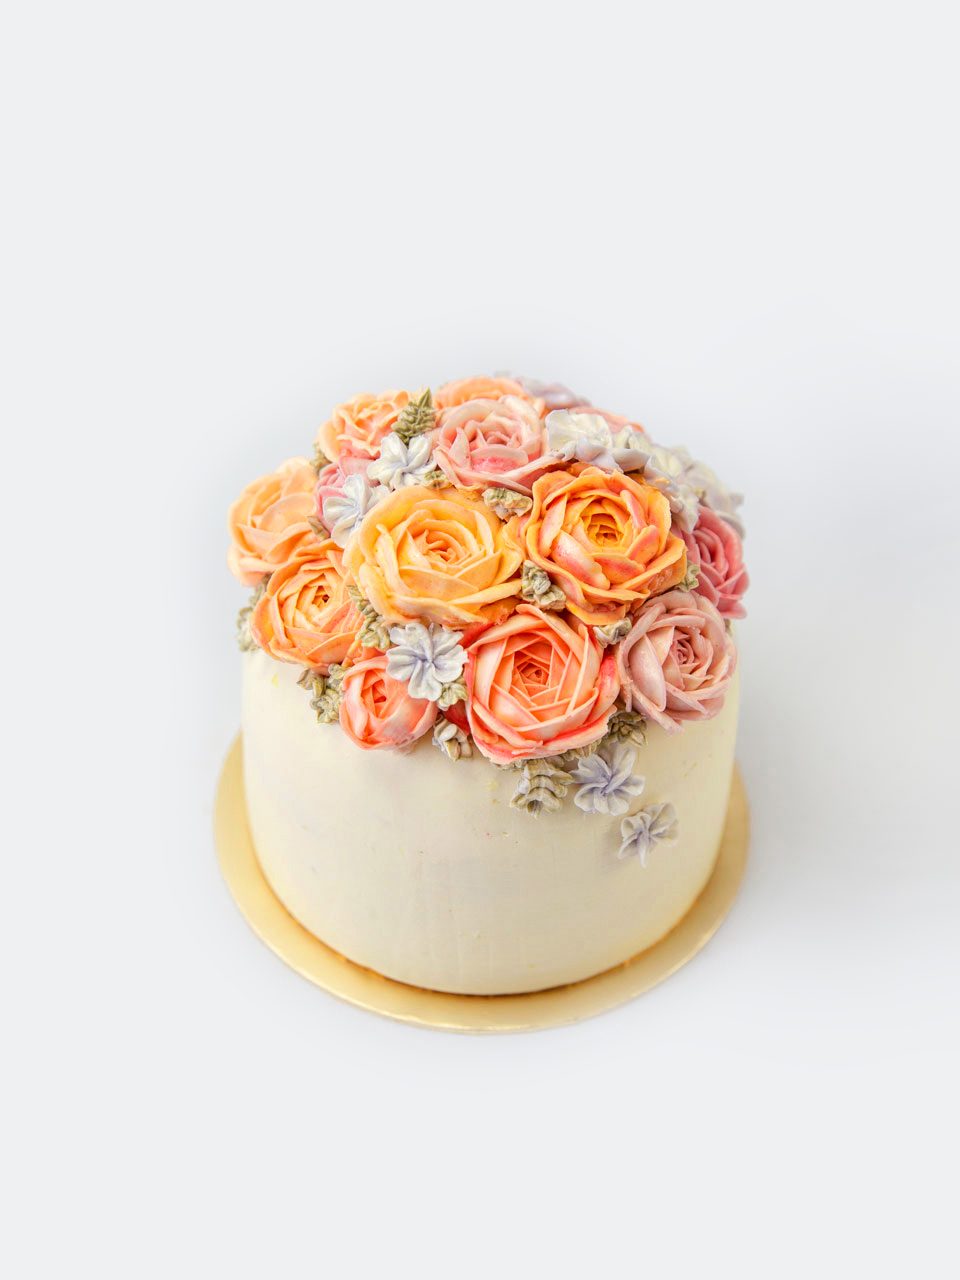 Delectable Cake - Online cake delivery Malaysia